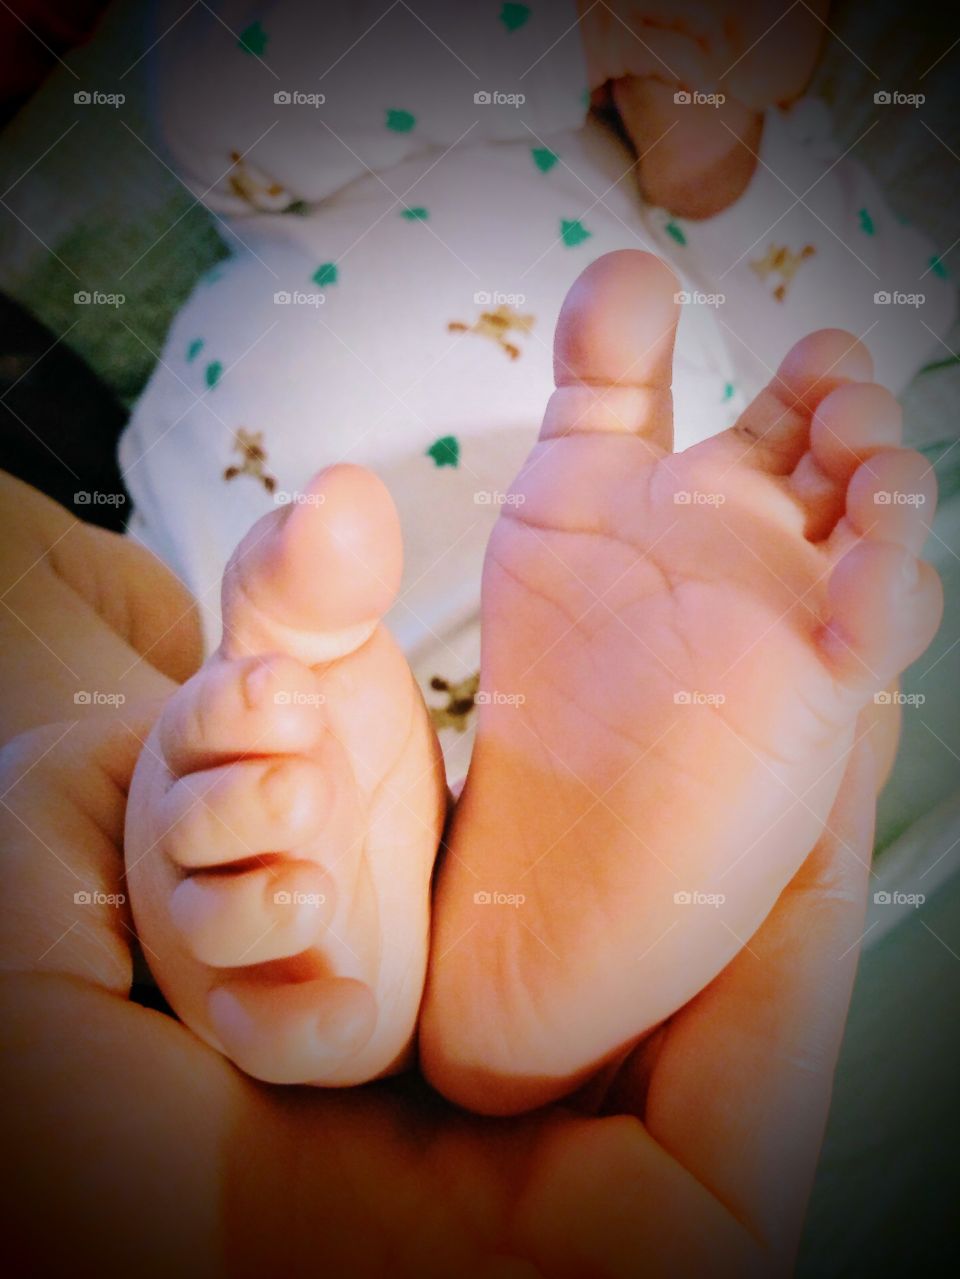 tiny baby feet and toes